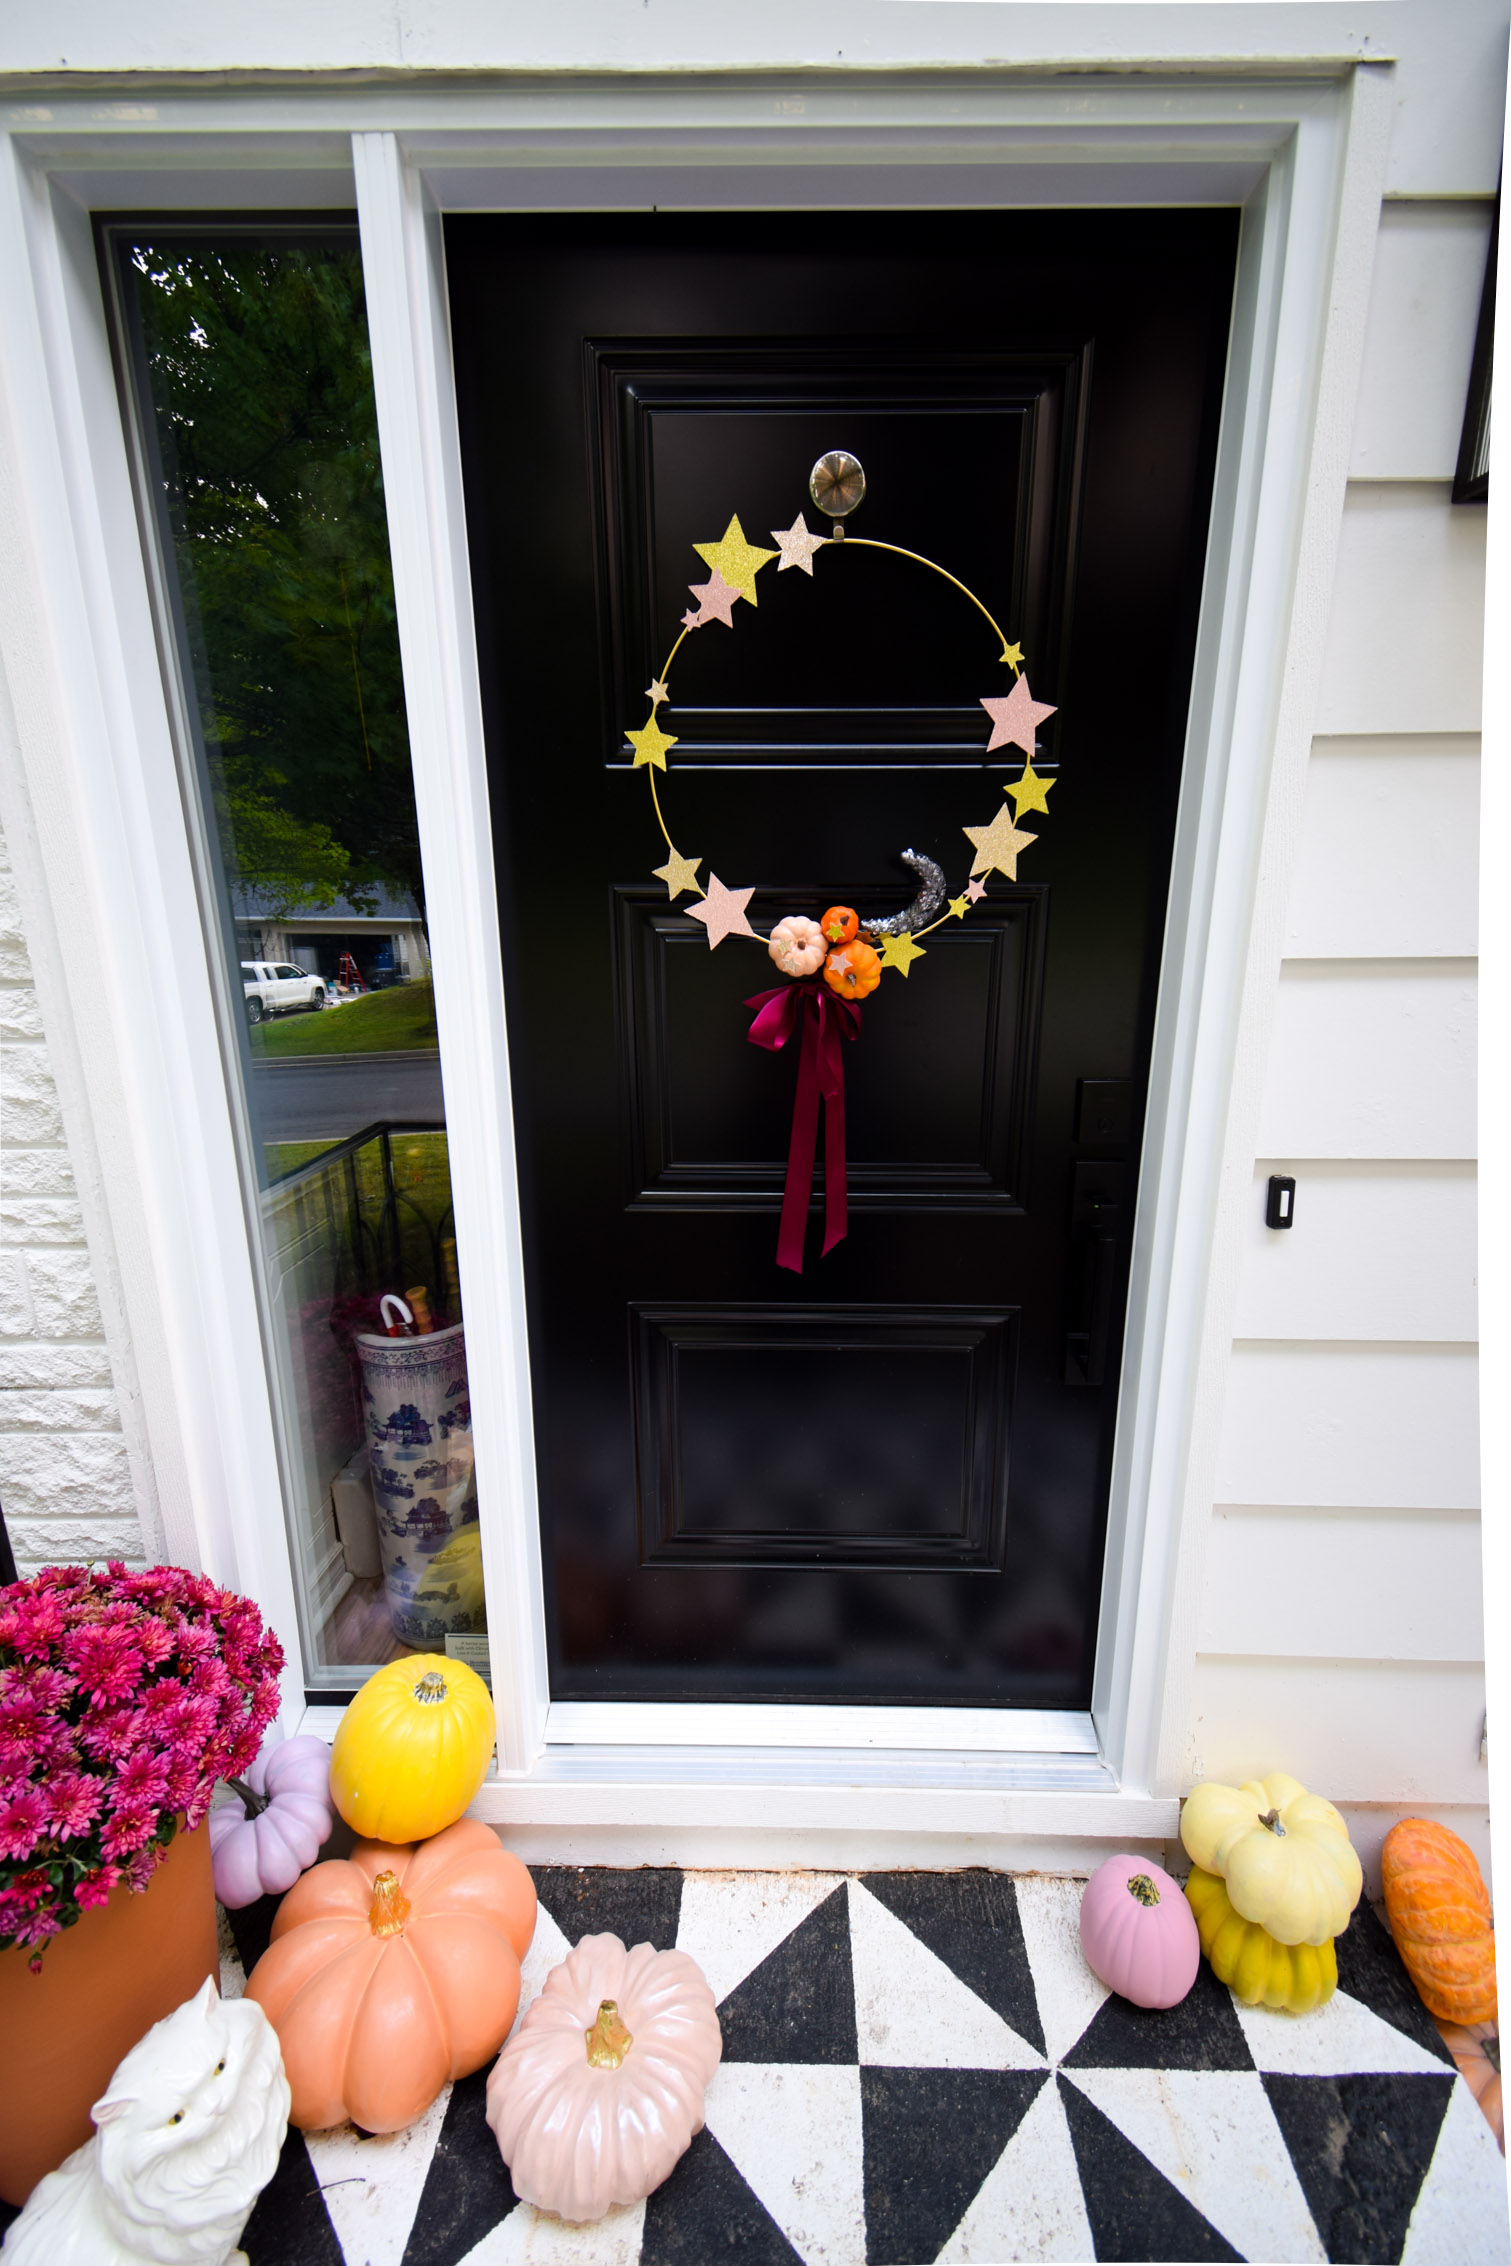 Using glitter cardstock and craft pumpkins, create a star and pumpkin fall wreath. A hoop wreath for your front door, and one for the playhouse too!